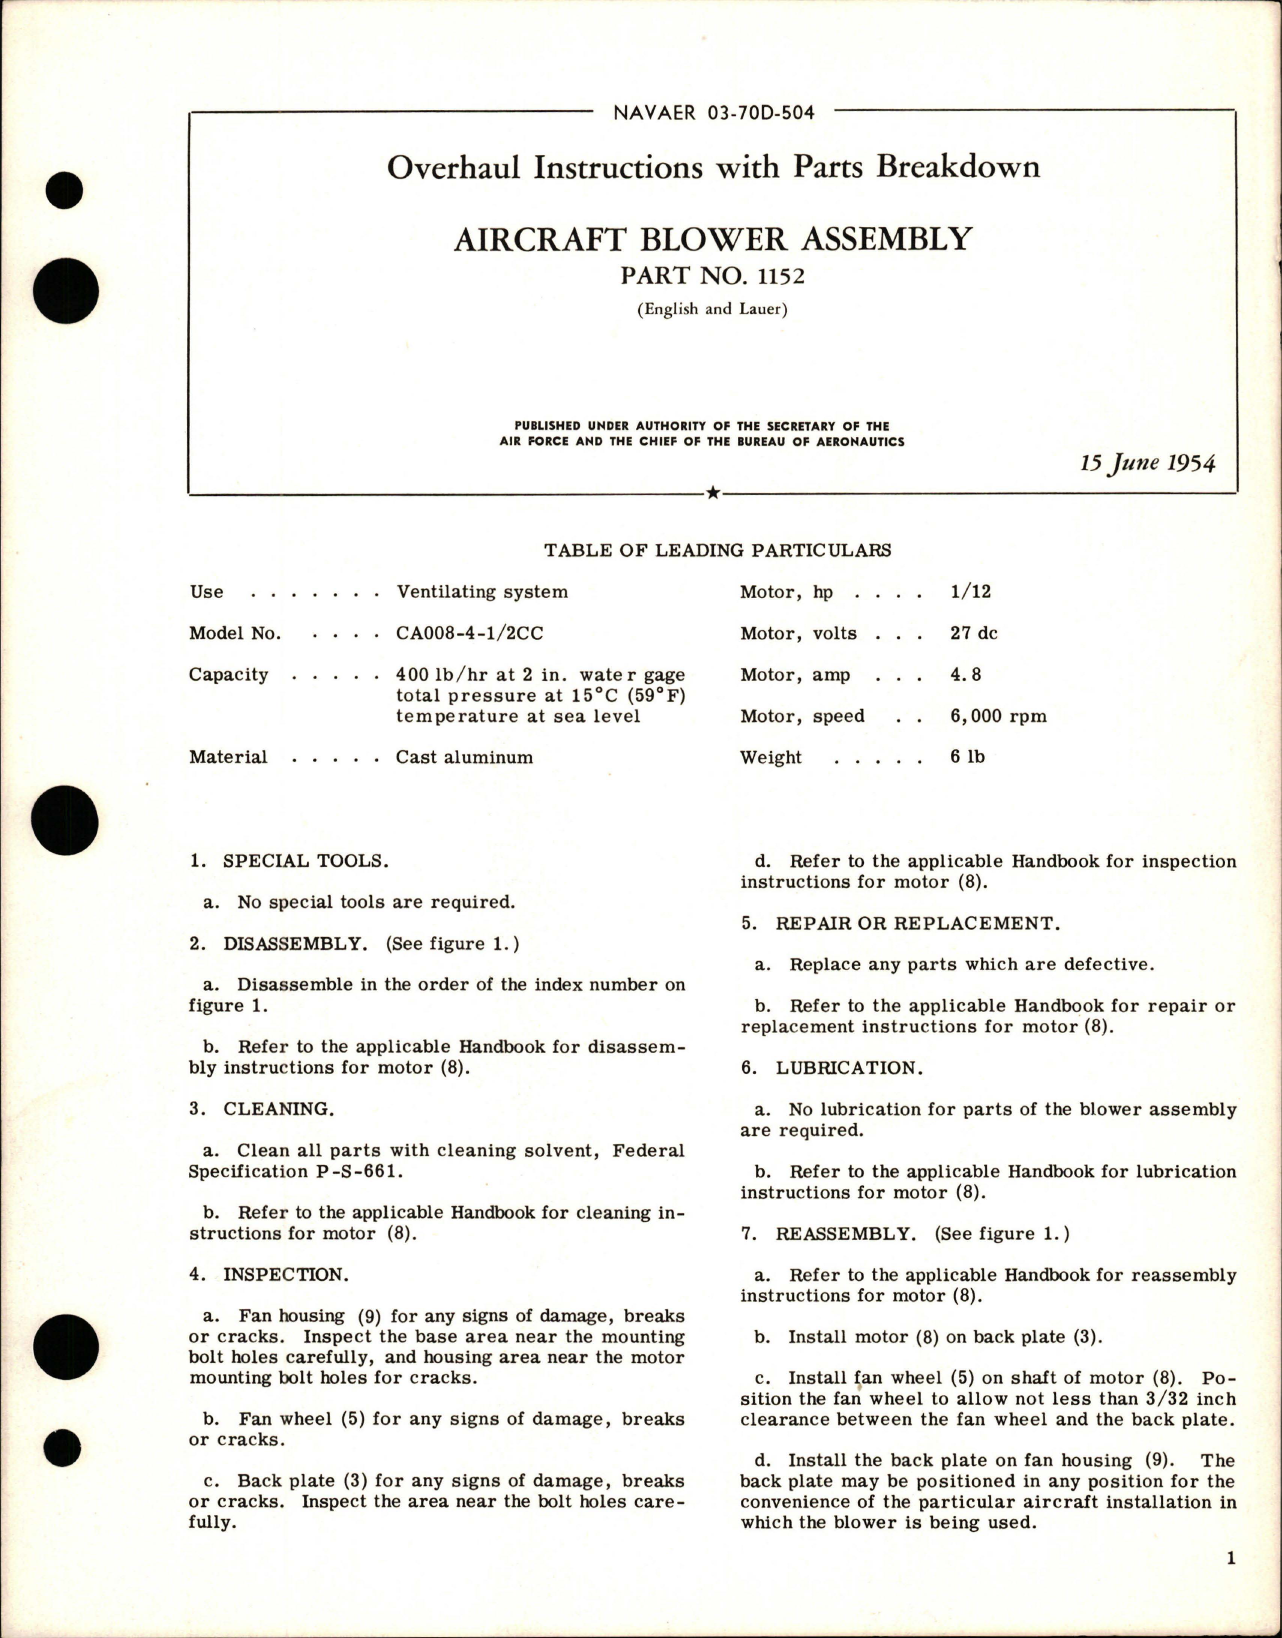 Sample page 1 from AirCorps Library document: Overhaul Instructions with Parts Breakdown for Aircraft Blower Assembly - Part 1152